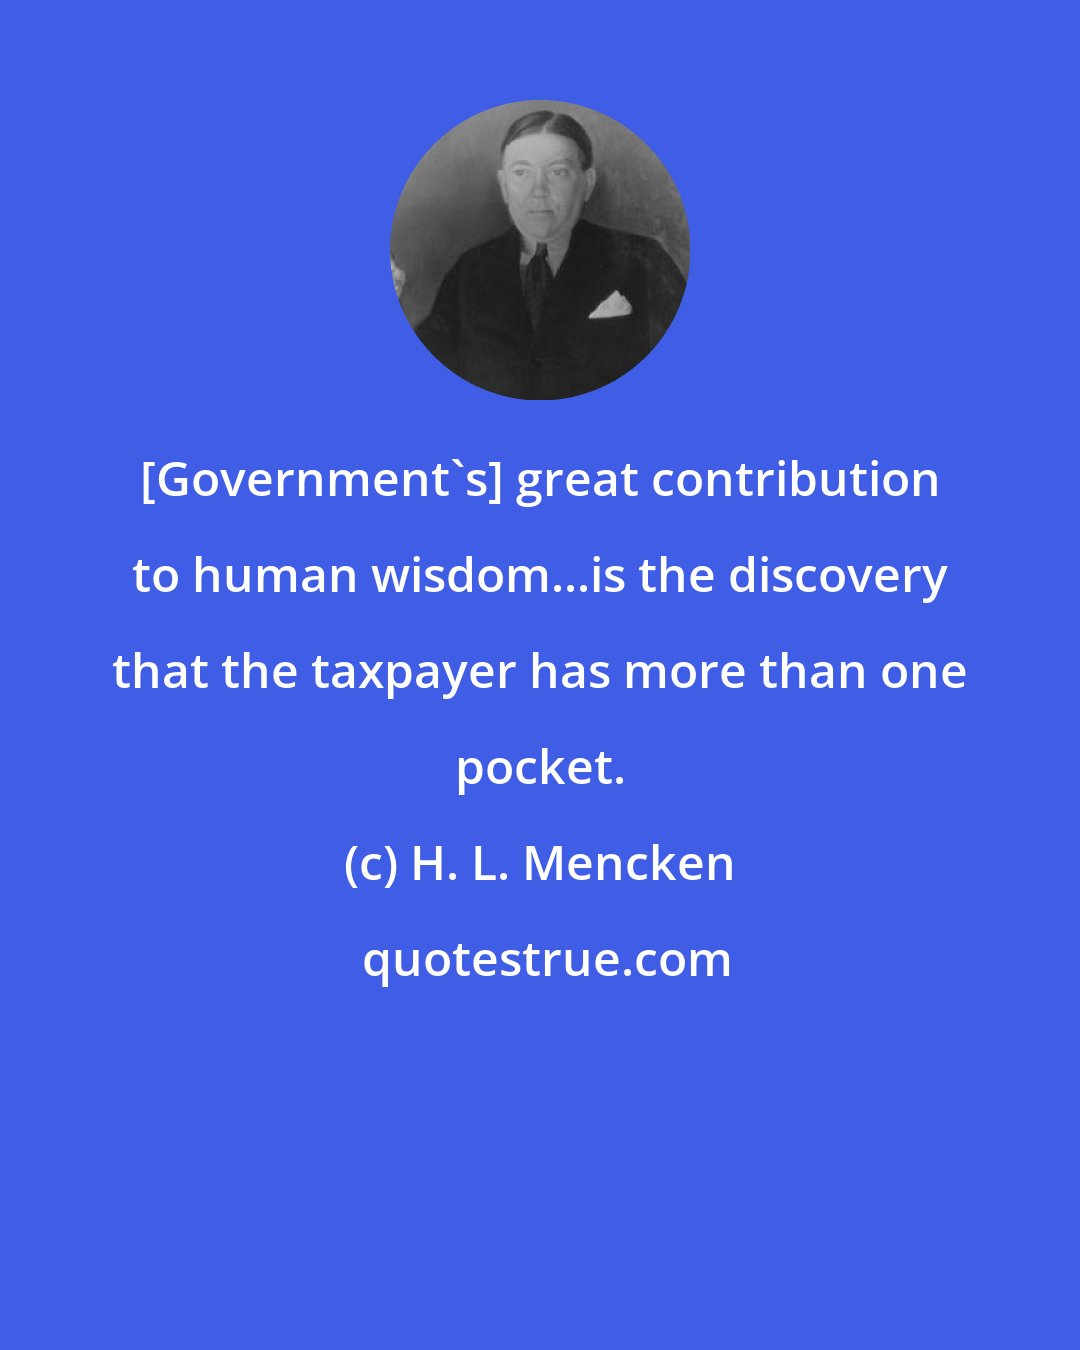 H. L. Mencken: [Government's] great contribution to human wisdom...is the discovery that the taxpayer has more than one pocket.